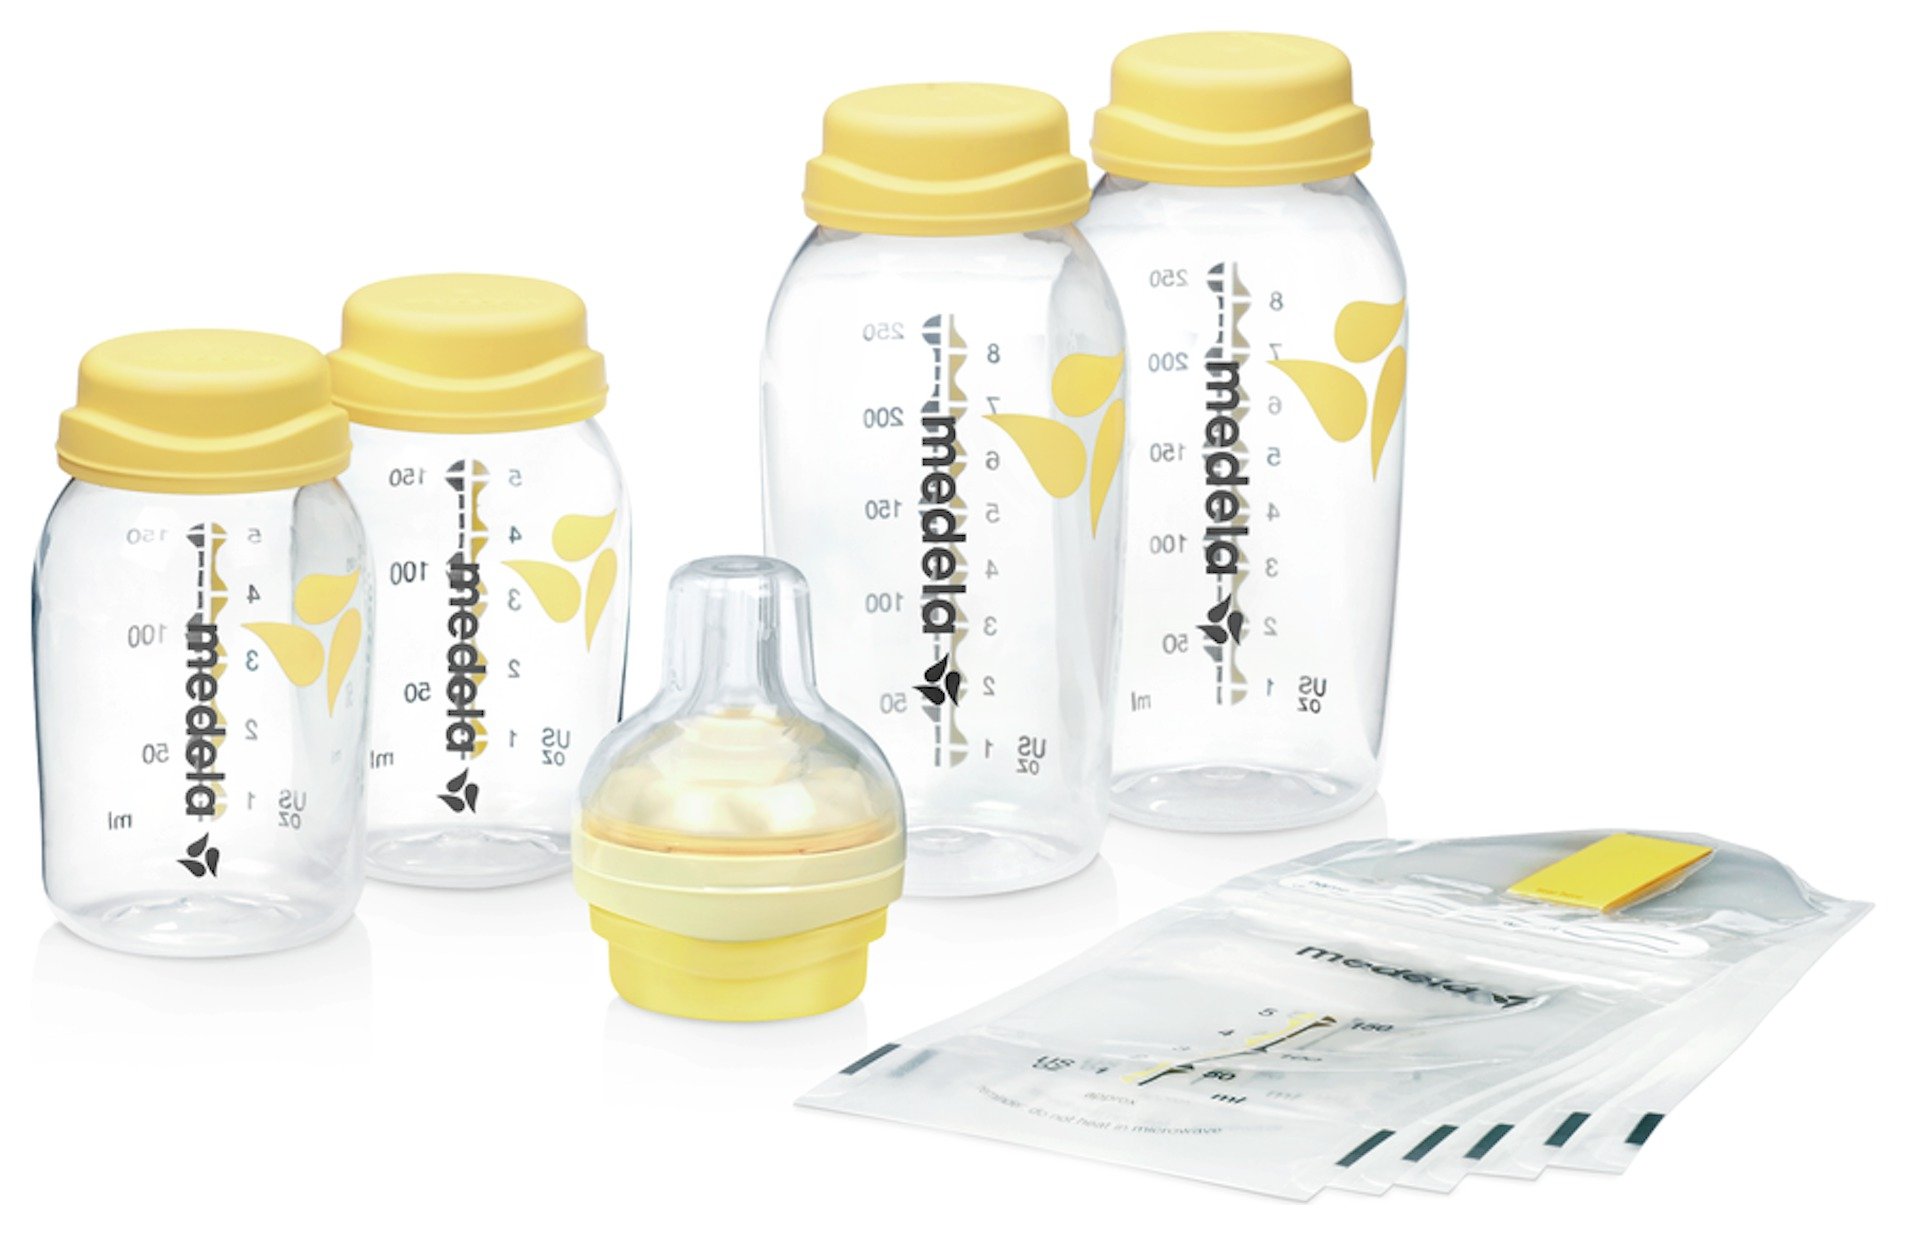 Medela Store and Feed Set Review